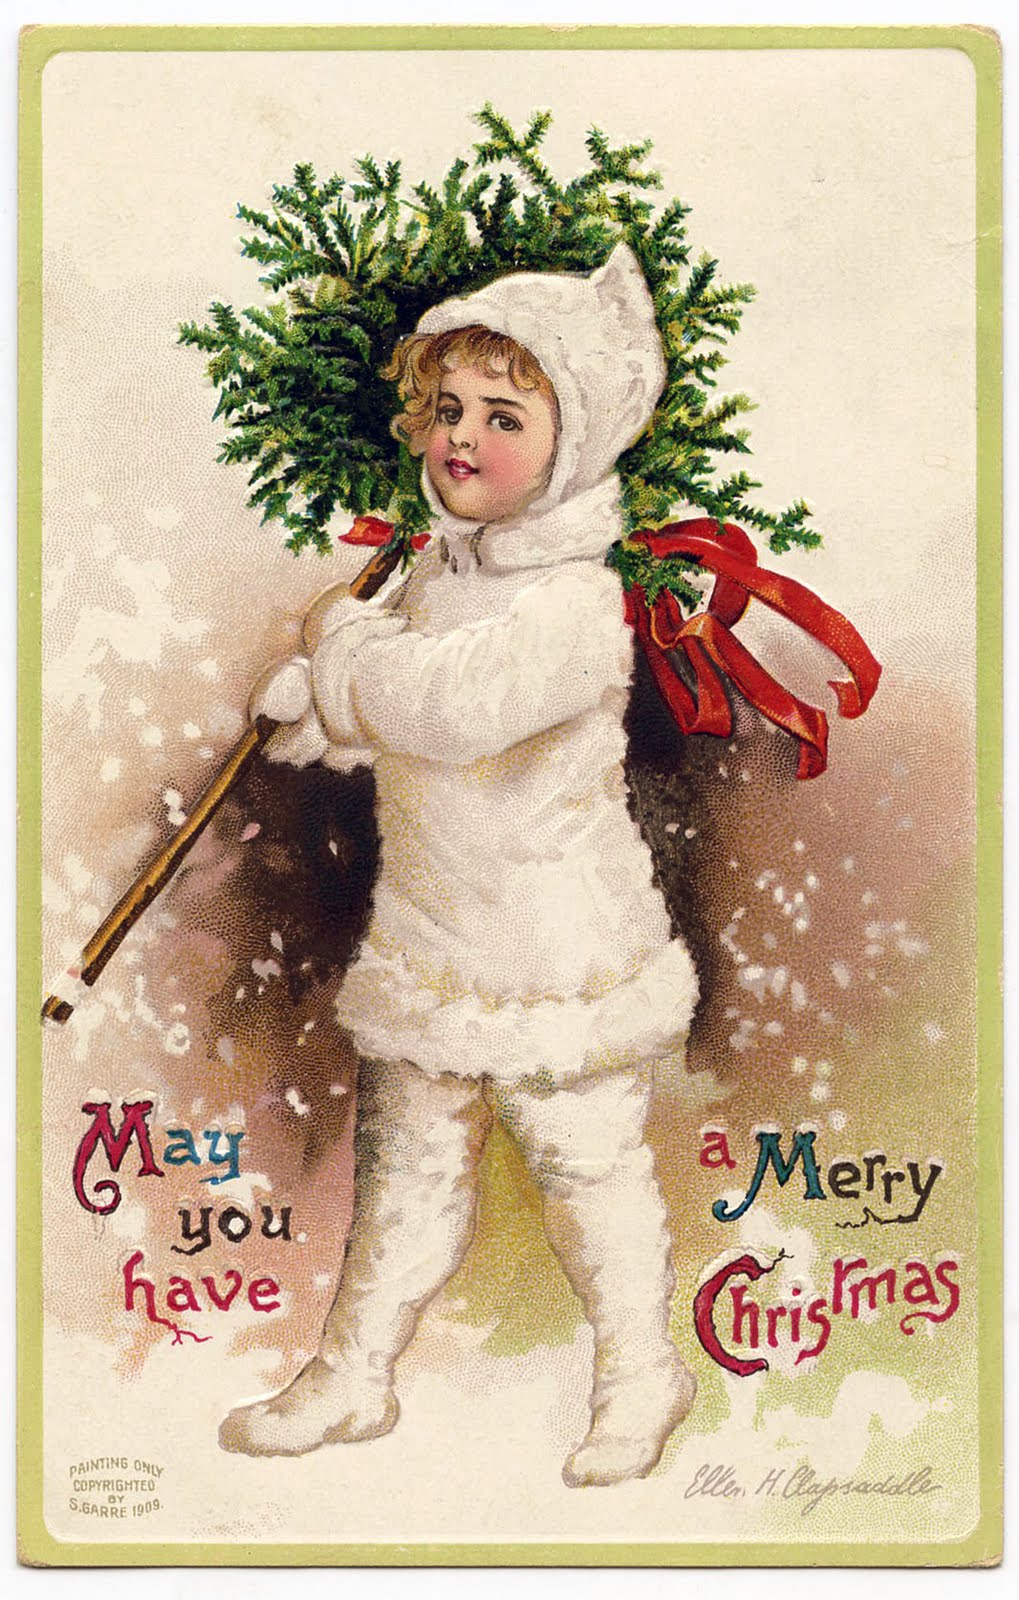 royalty free vintage christmas images